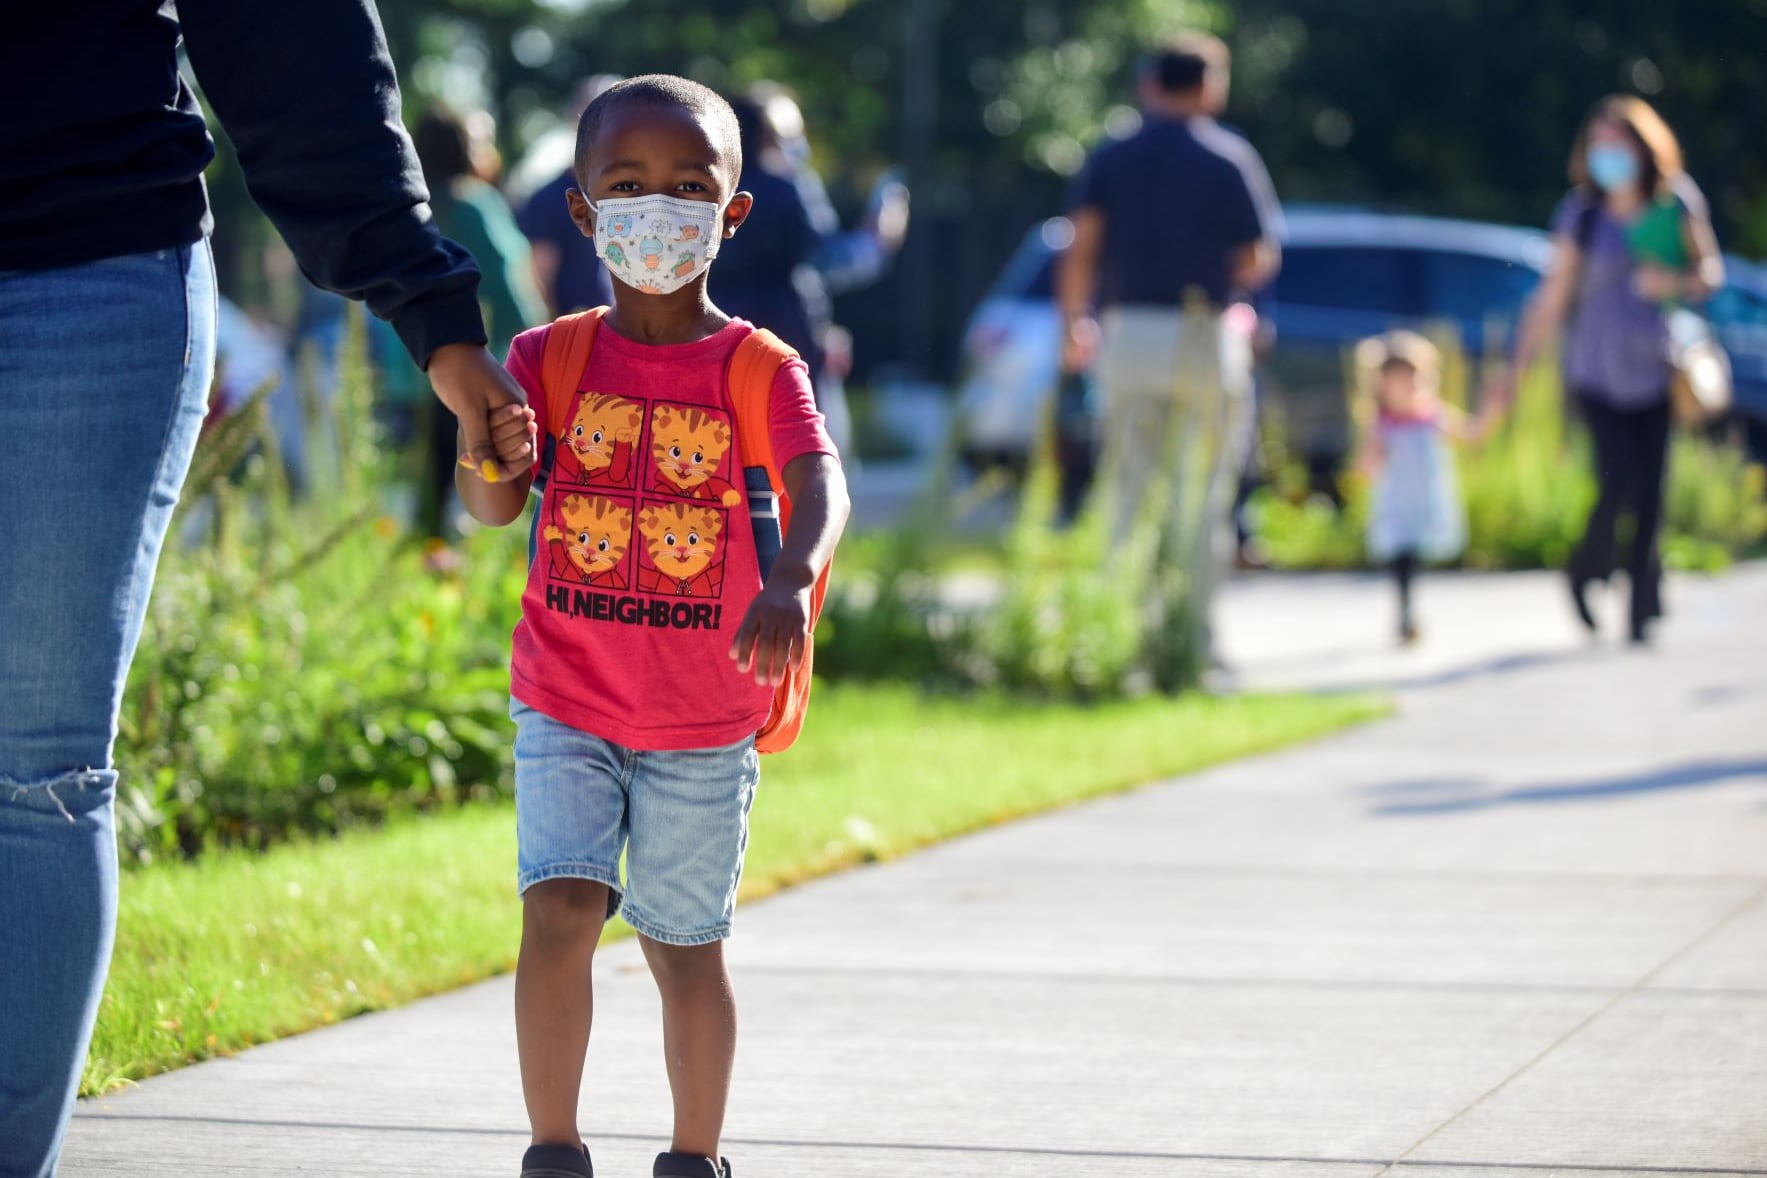 A little boy wearing a red shirt and protective mask holds someone’s hand as other children walk behind them on a sidewalk.